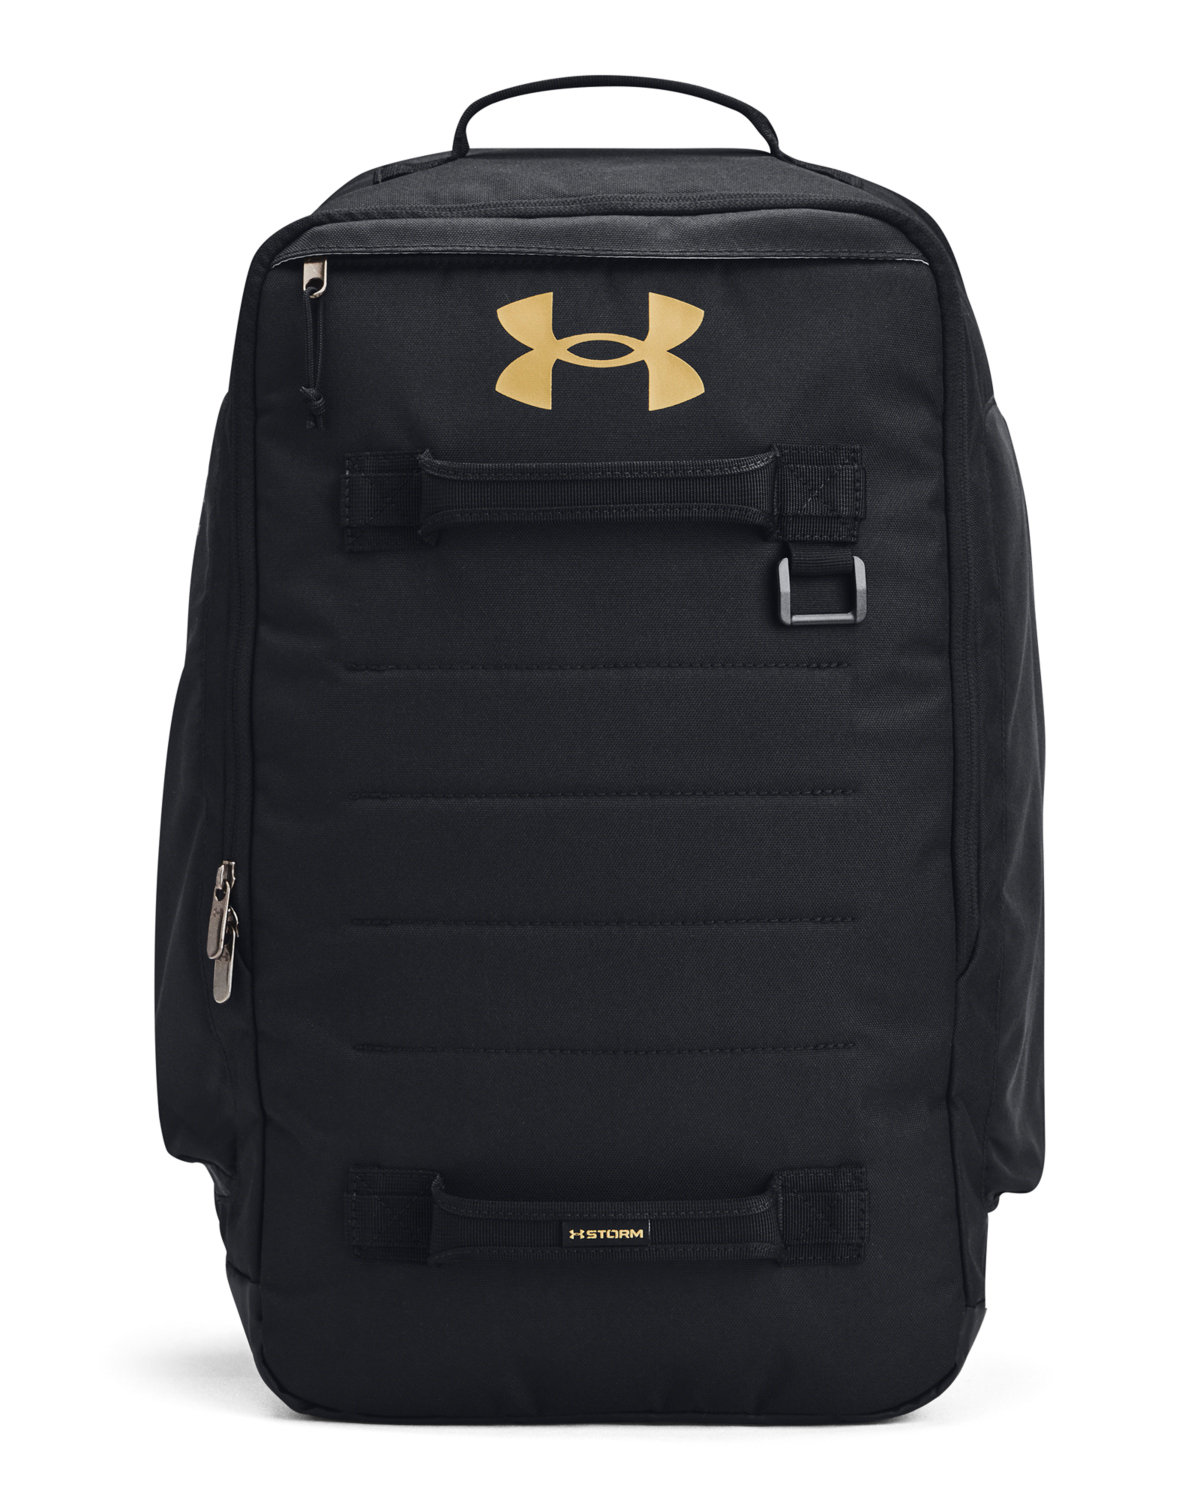 Under Armour 1378413 - Contain Backpack 2.0